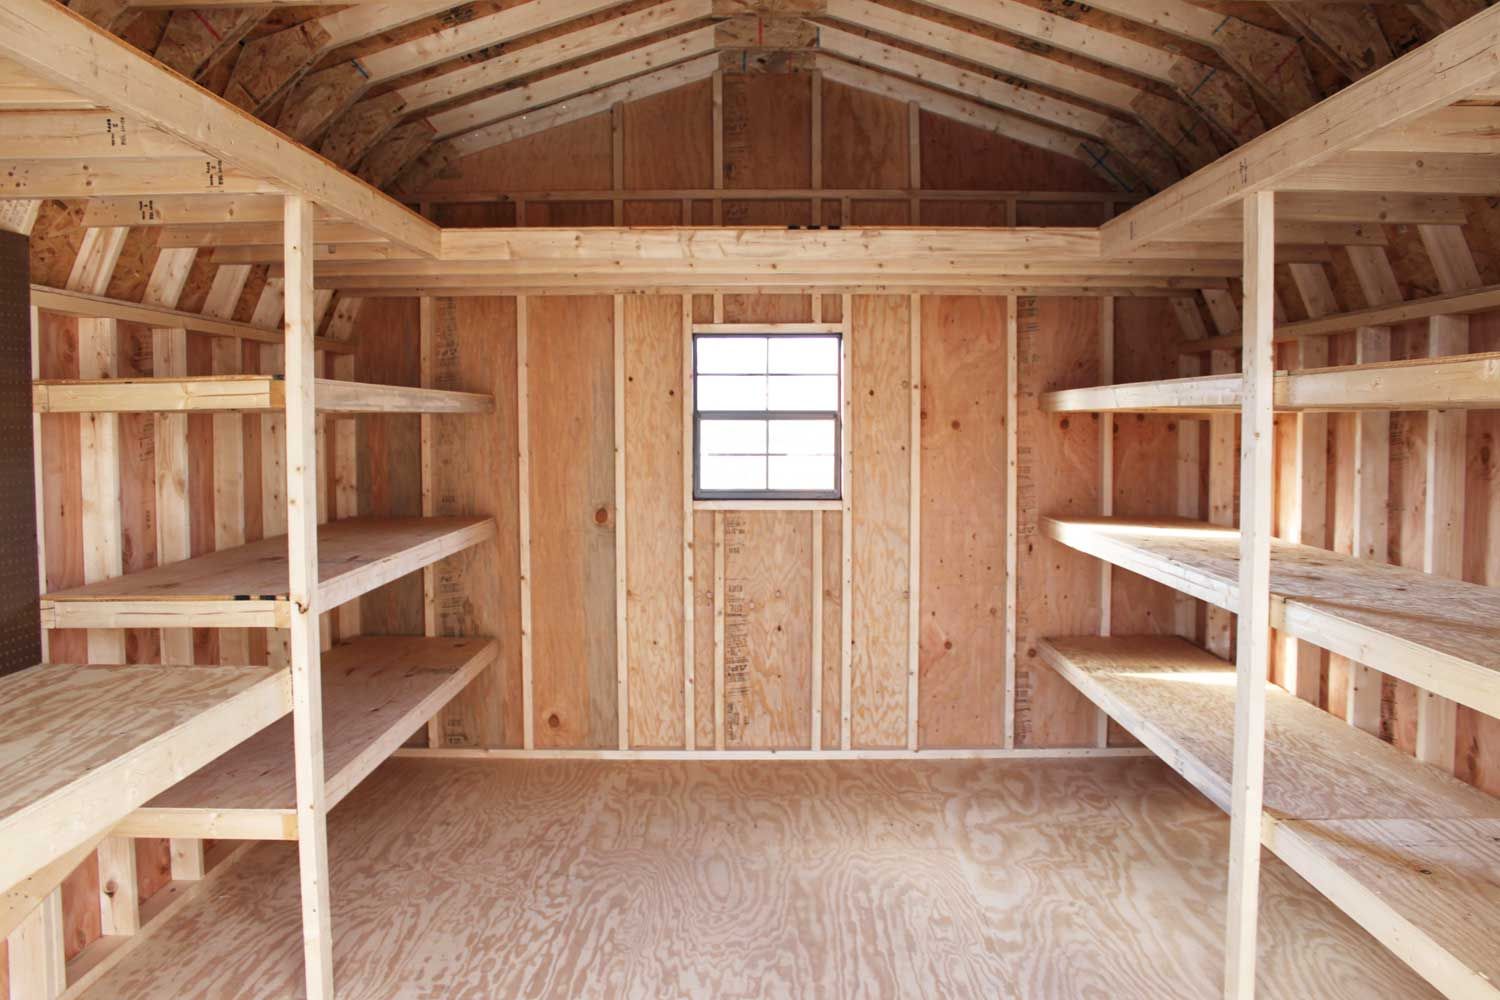 How To Make A Storage Shed